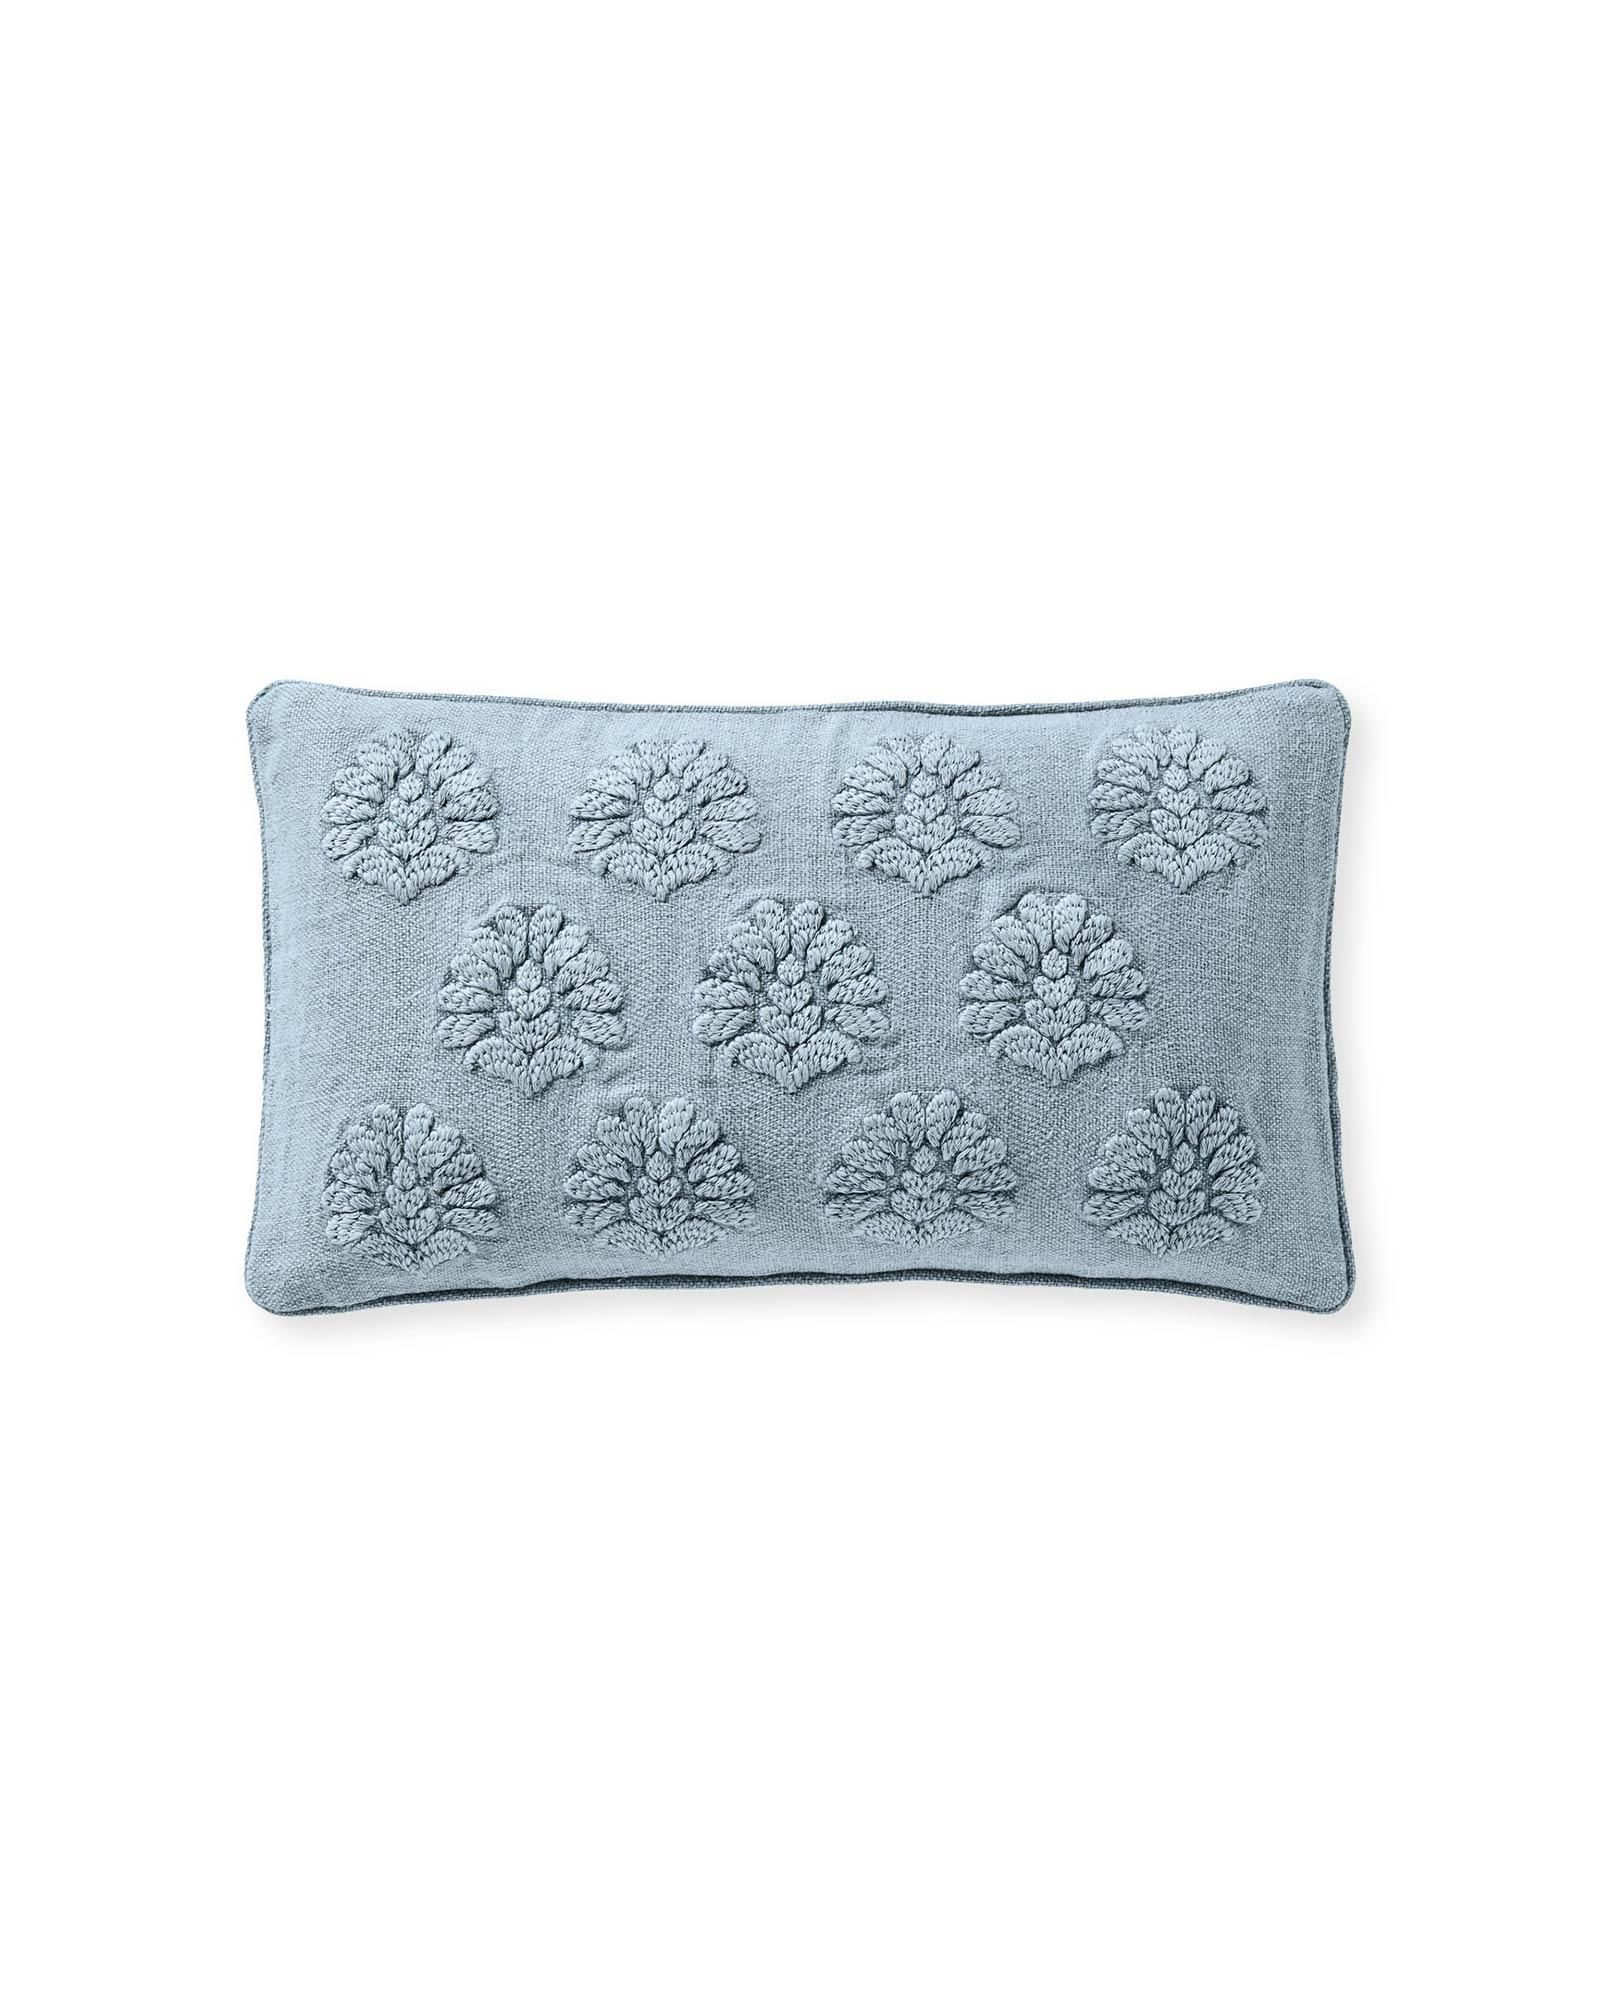 Miramonte Pillow Cover | Serena and Lily